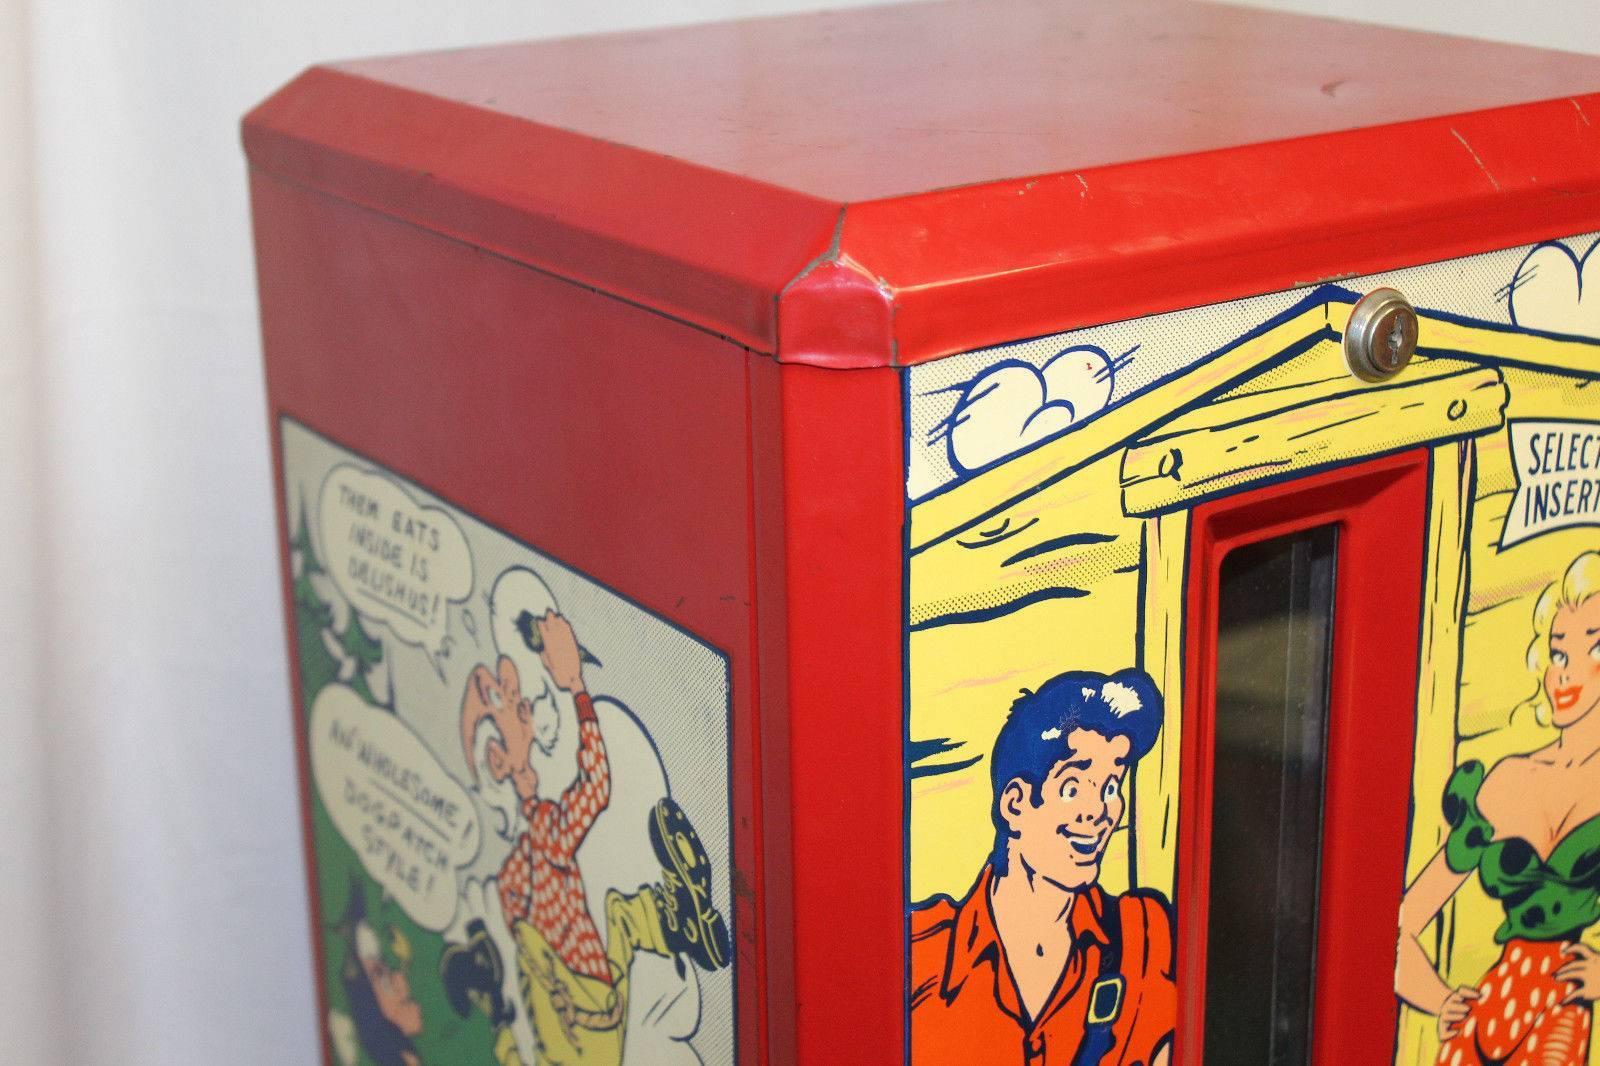 1949 Lil Abner 10 Cent Vendar-bar Candy Coin Op Vending Machine In Good Condition For Sale In Orange, CA